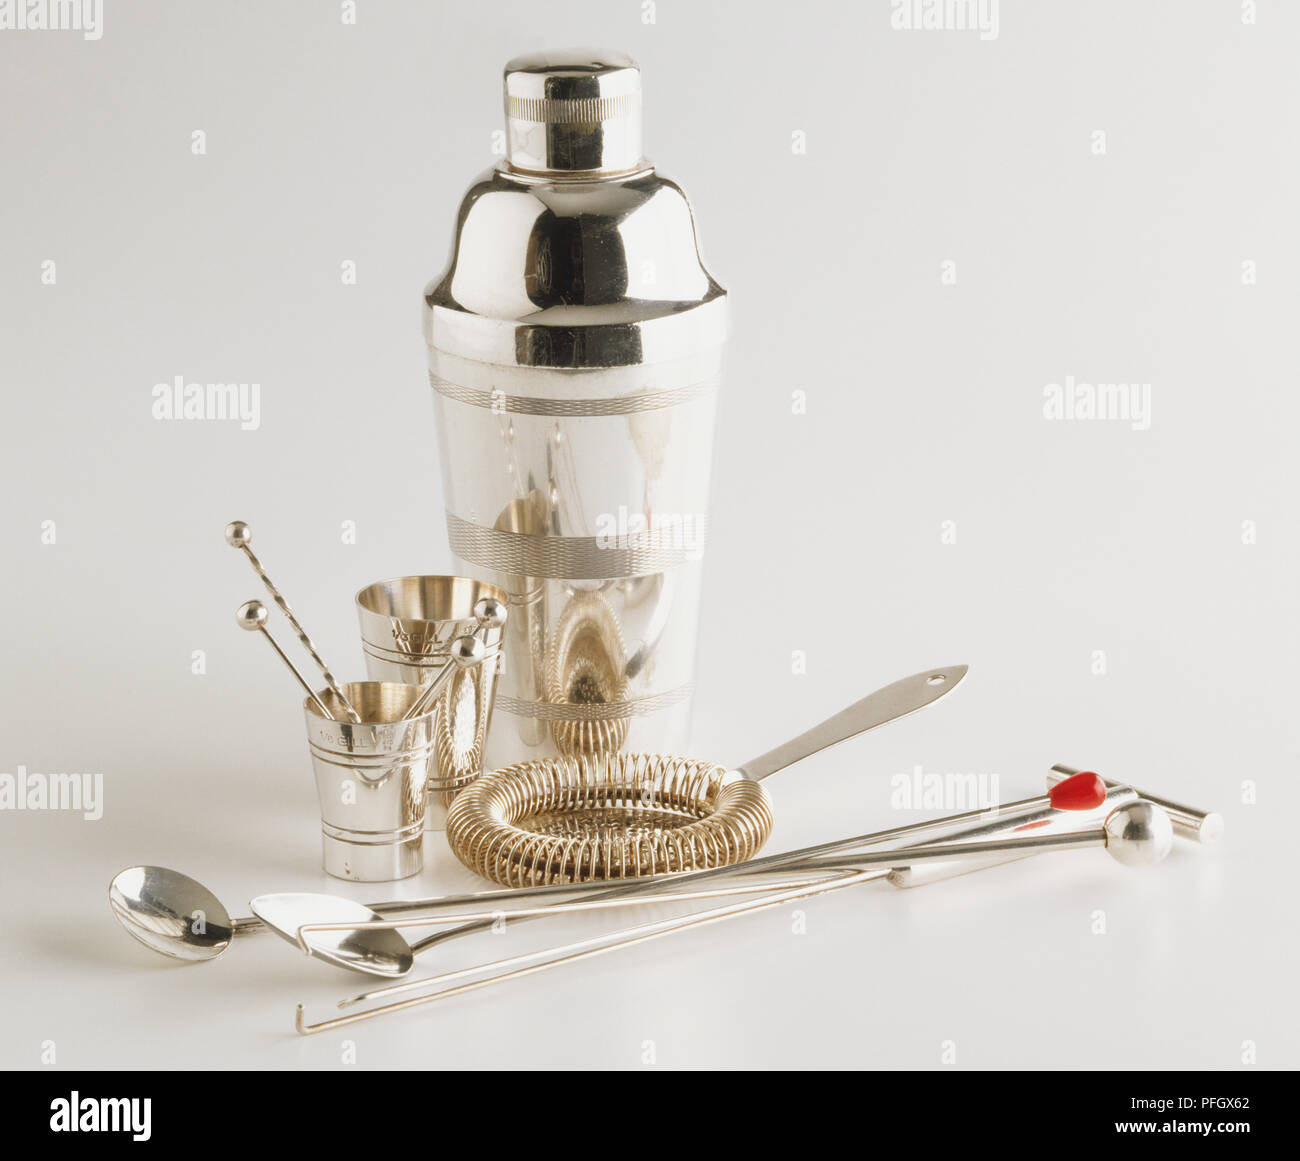 A cocktail shaker and accessories Stock Photo